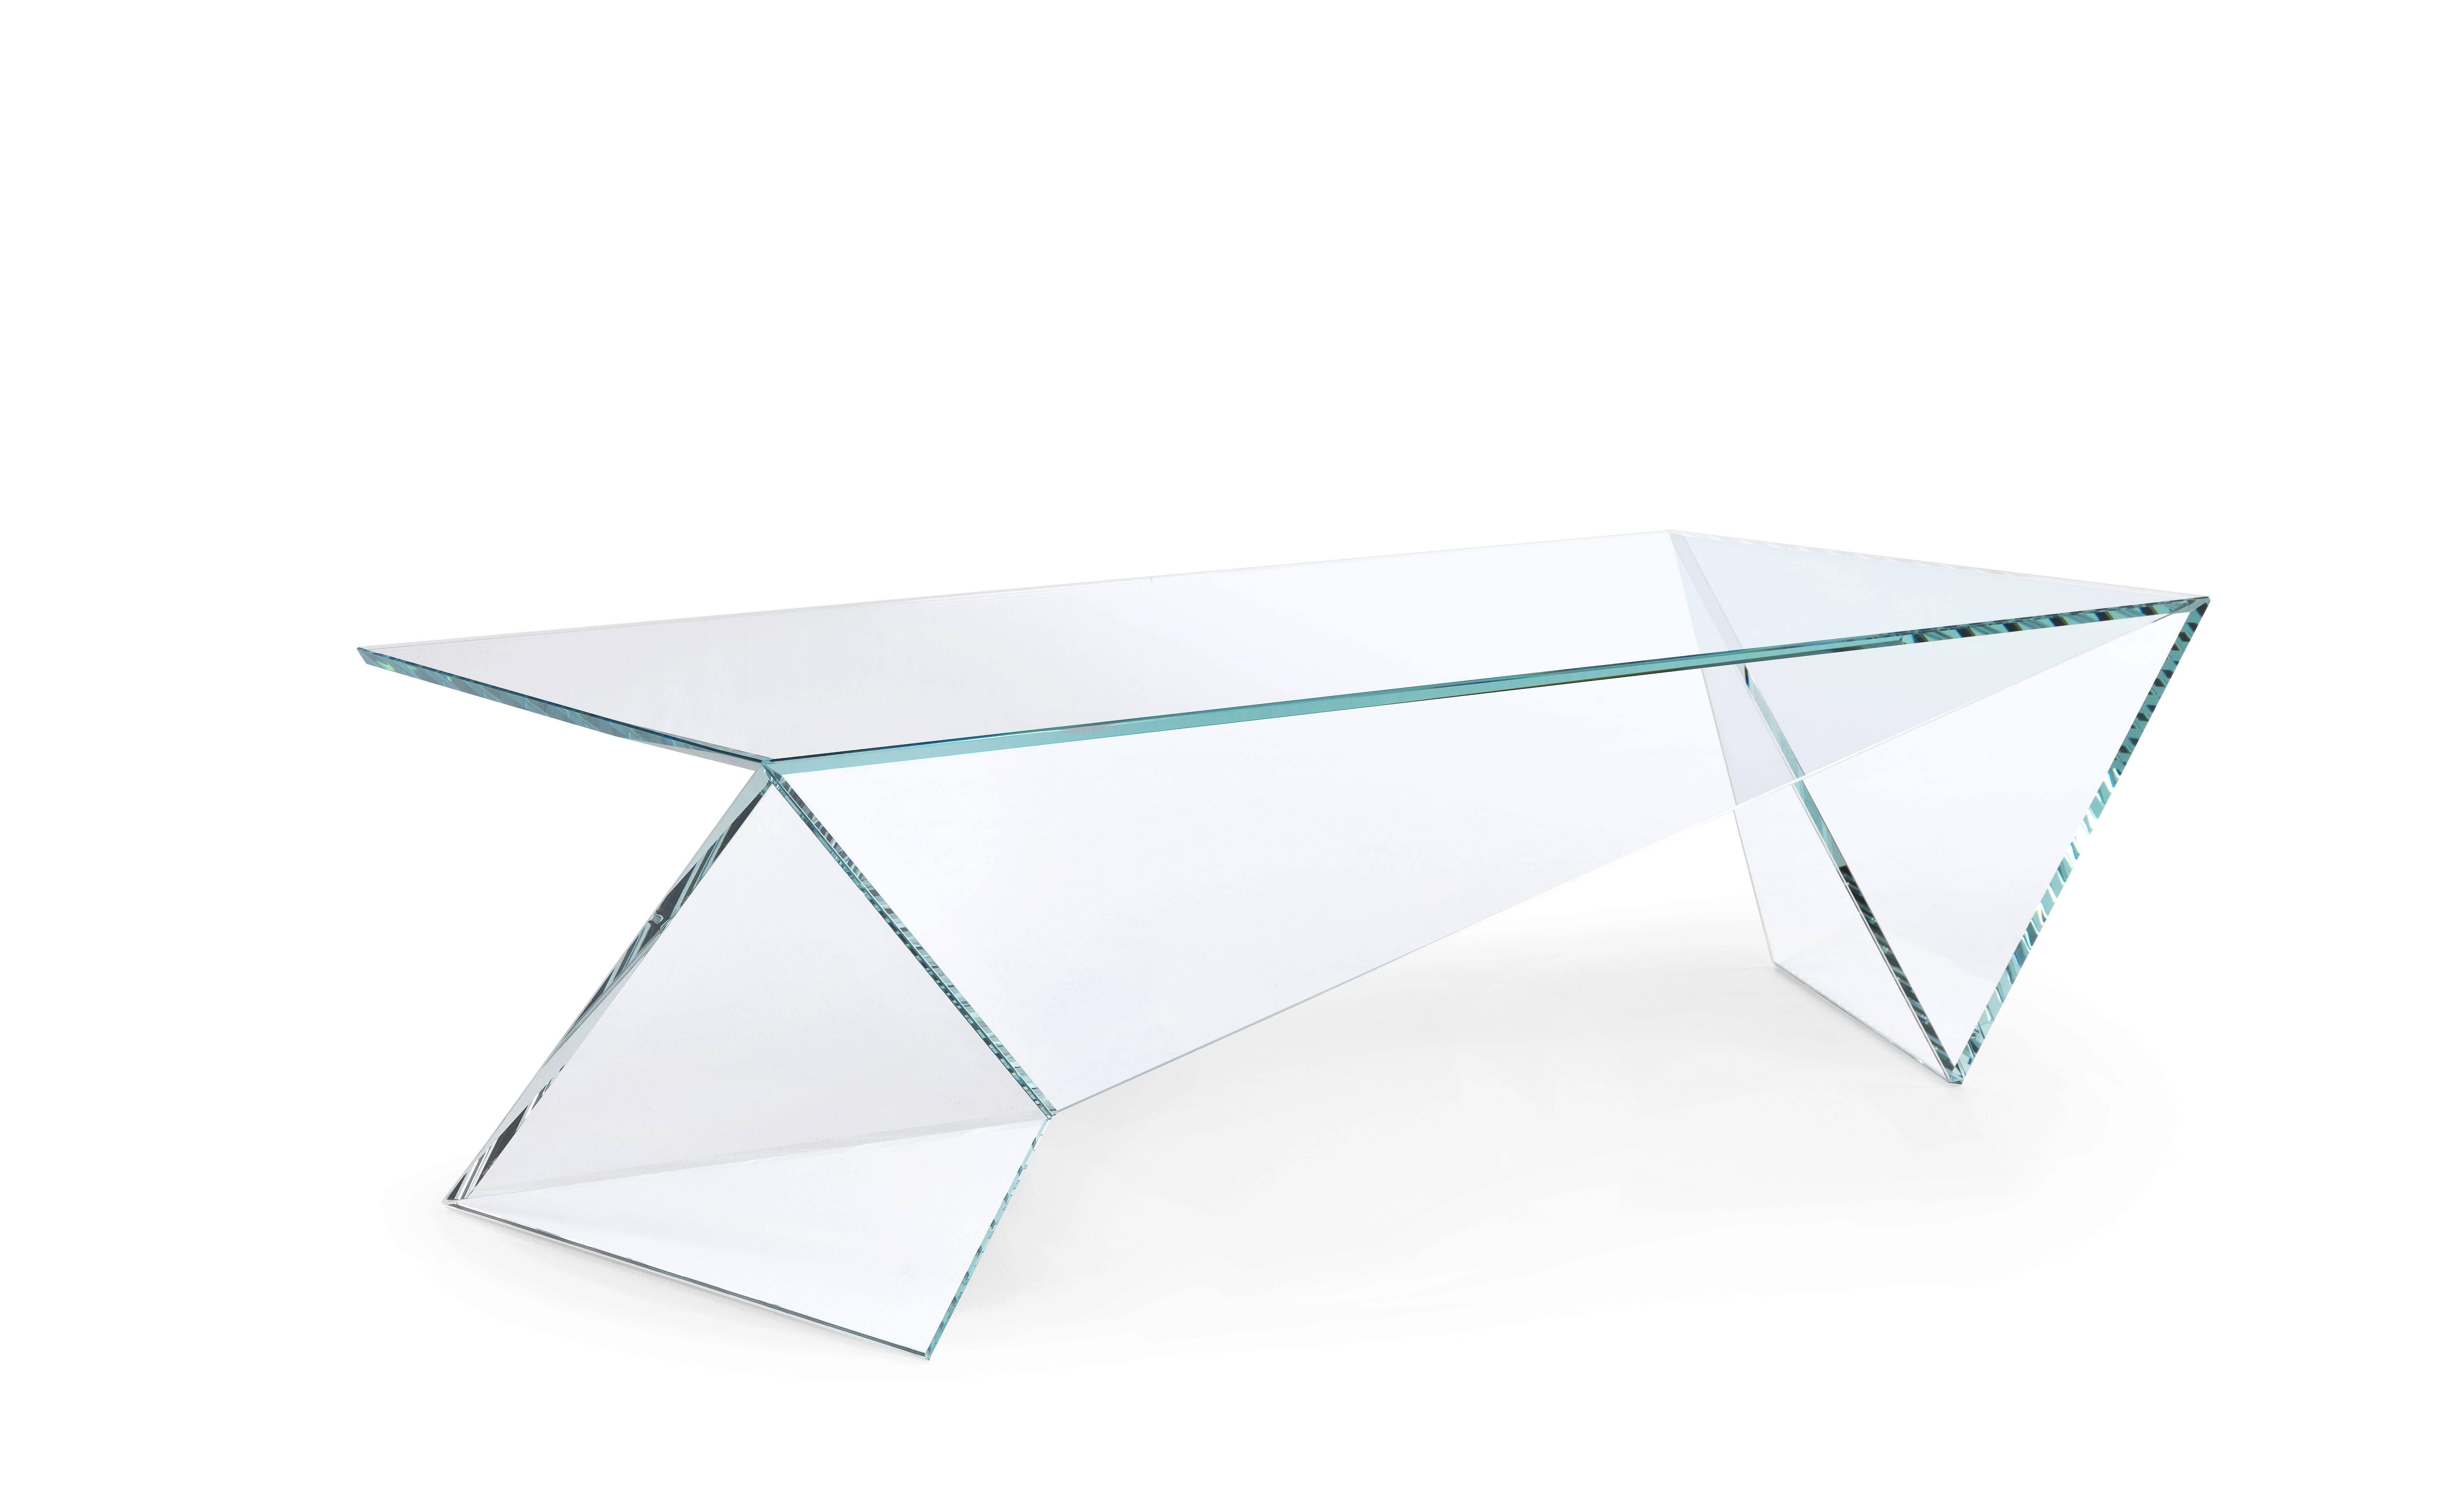 The coffee table 'Origami' is made of extra-clear glass. Coffee table dimension: L 140 x W 70 x H 34cm. The origami was presented by Sotheby's for the auction on 4 November 2015.
The inspiration for origami came from the observation of a simple